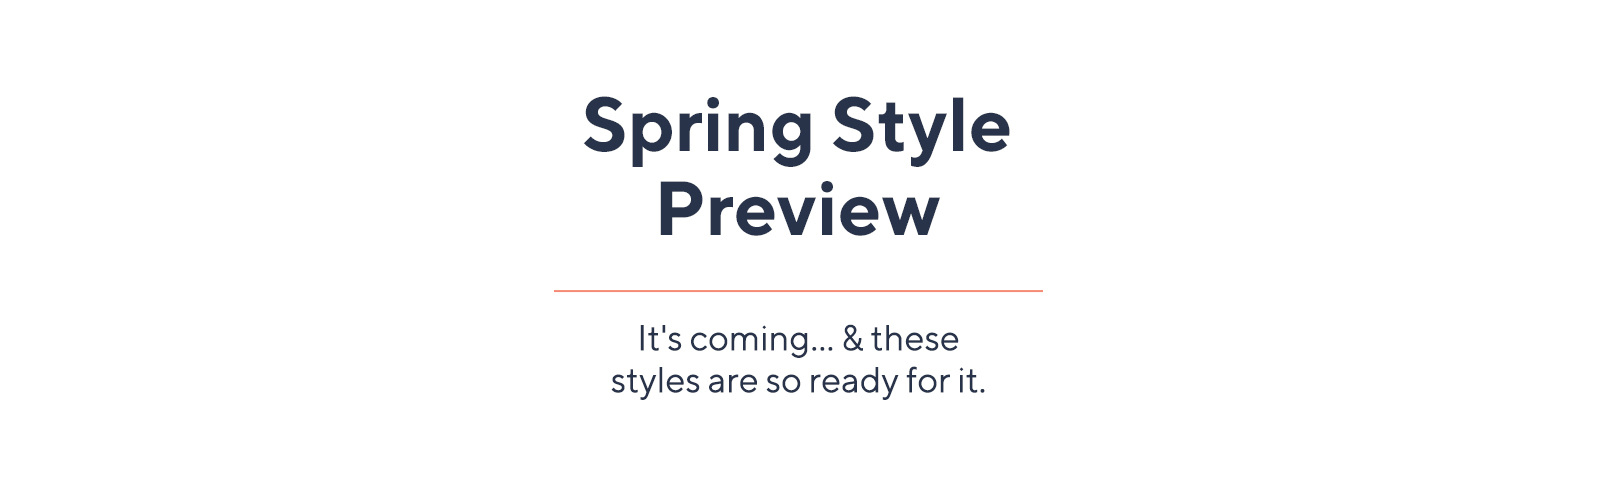 Spring Style Preview  It's coming… & these styles are so ready for it.